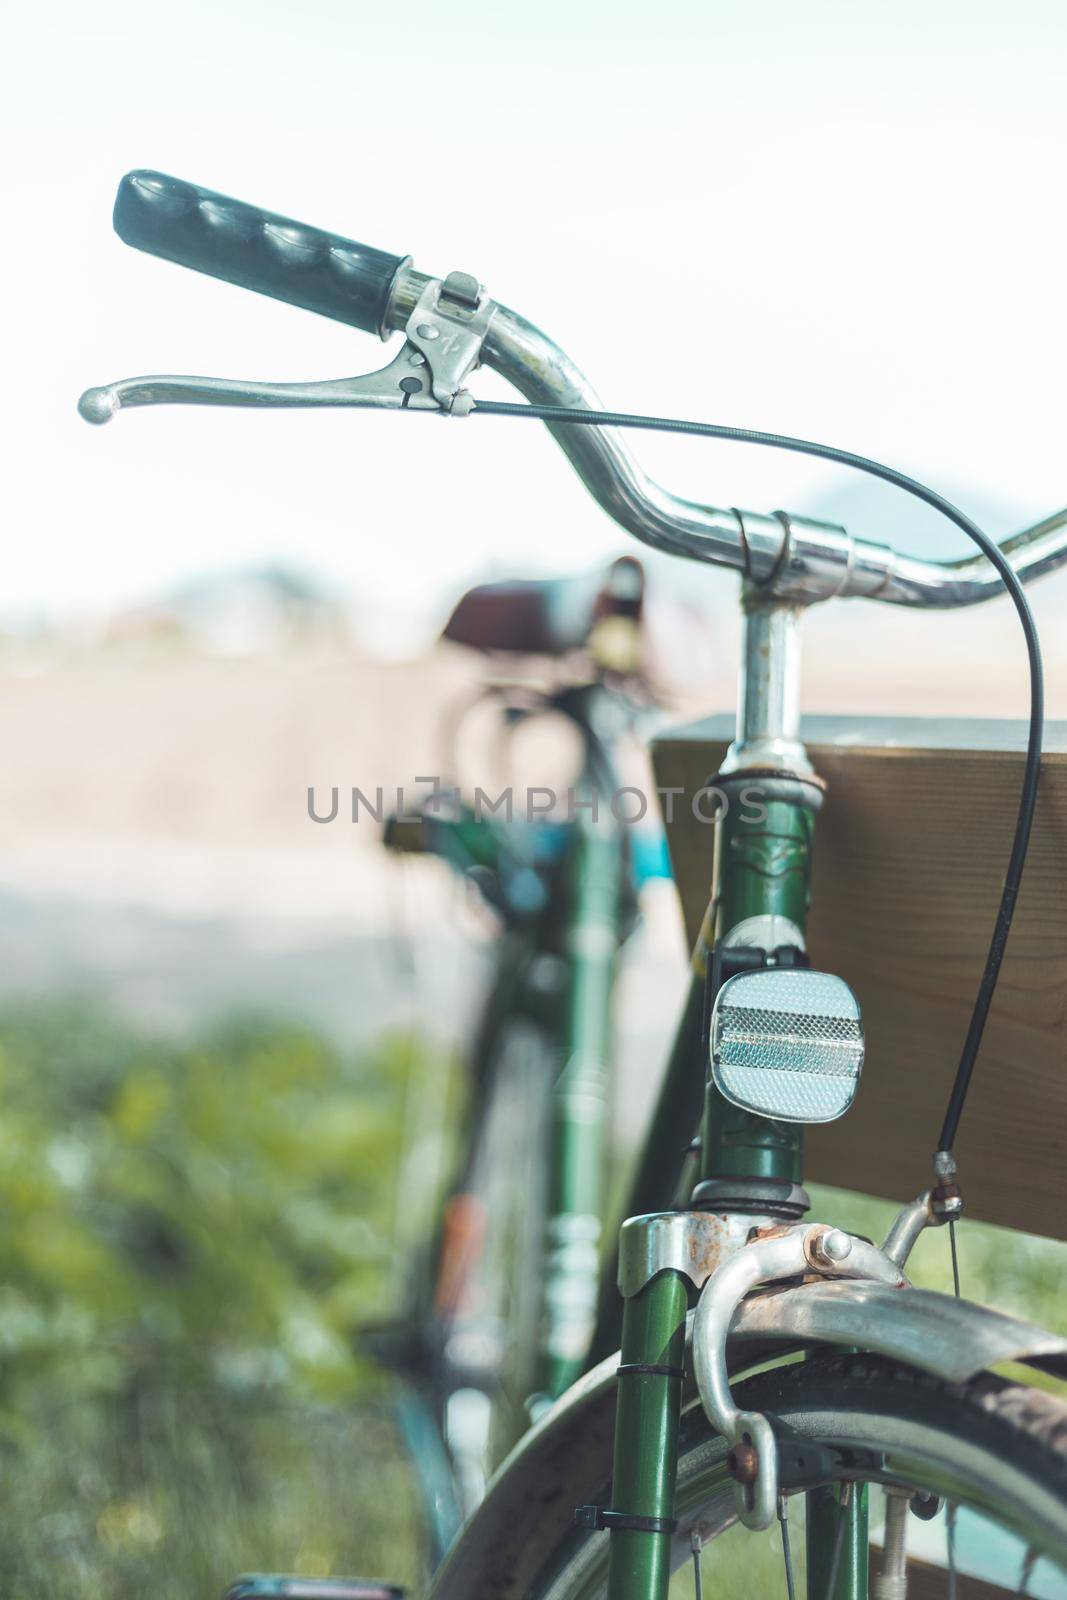 Front picture of a vintage retro bike, head reflectors and blurry background